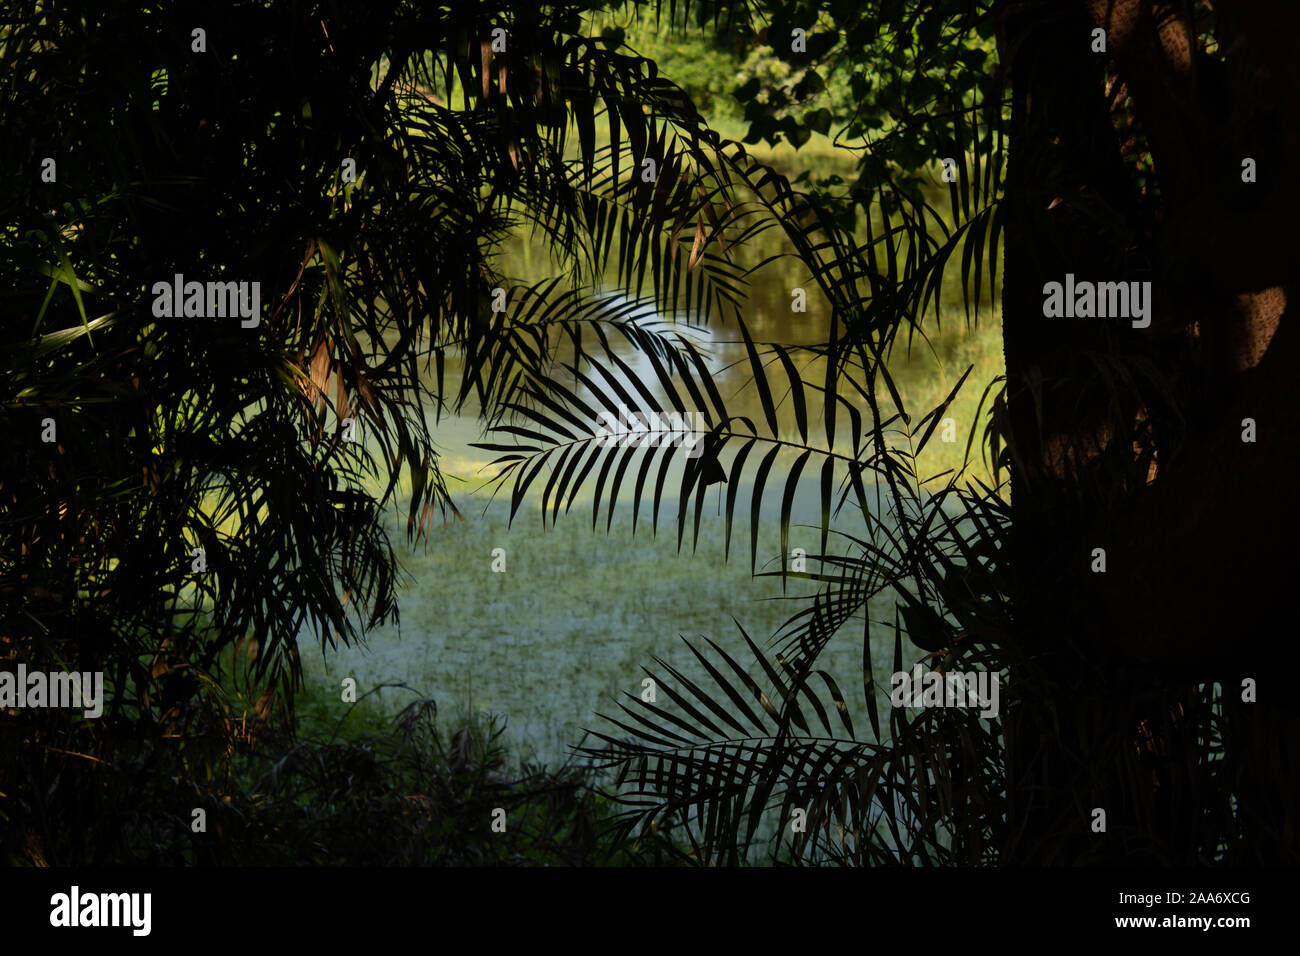 View of the wetland from dense tree cover in a park Stock Photo